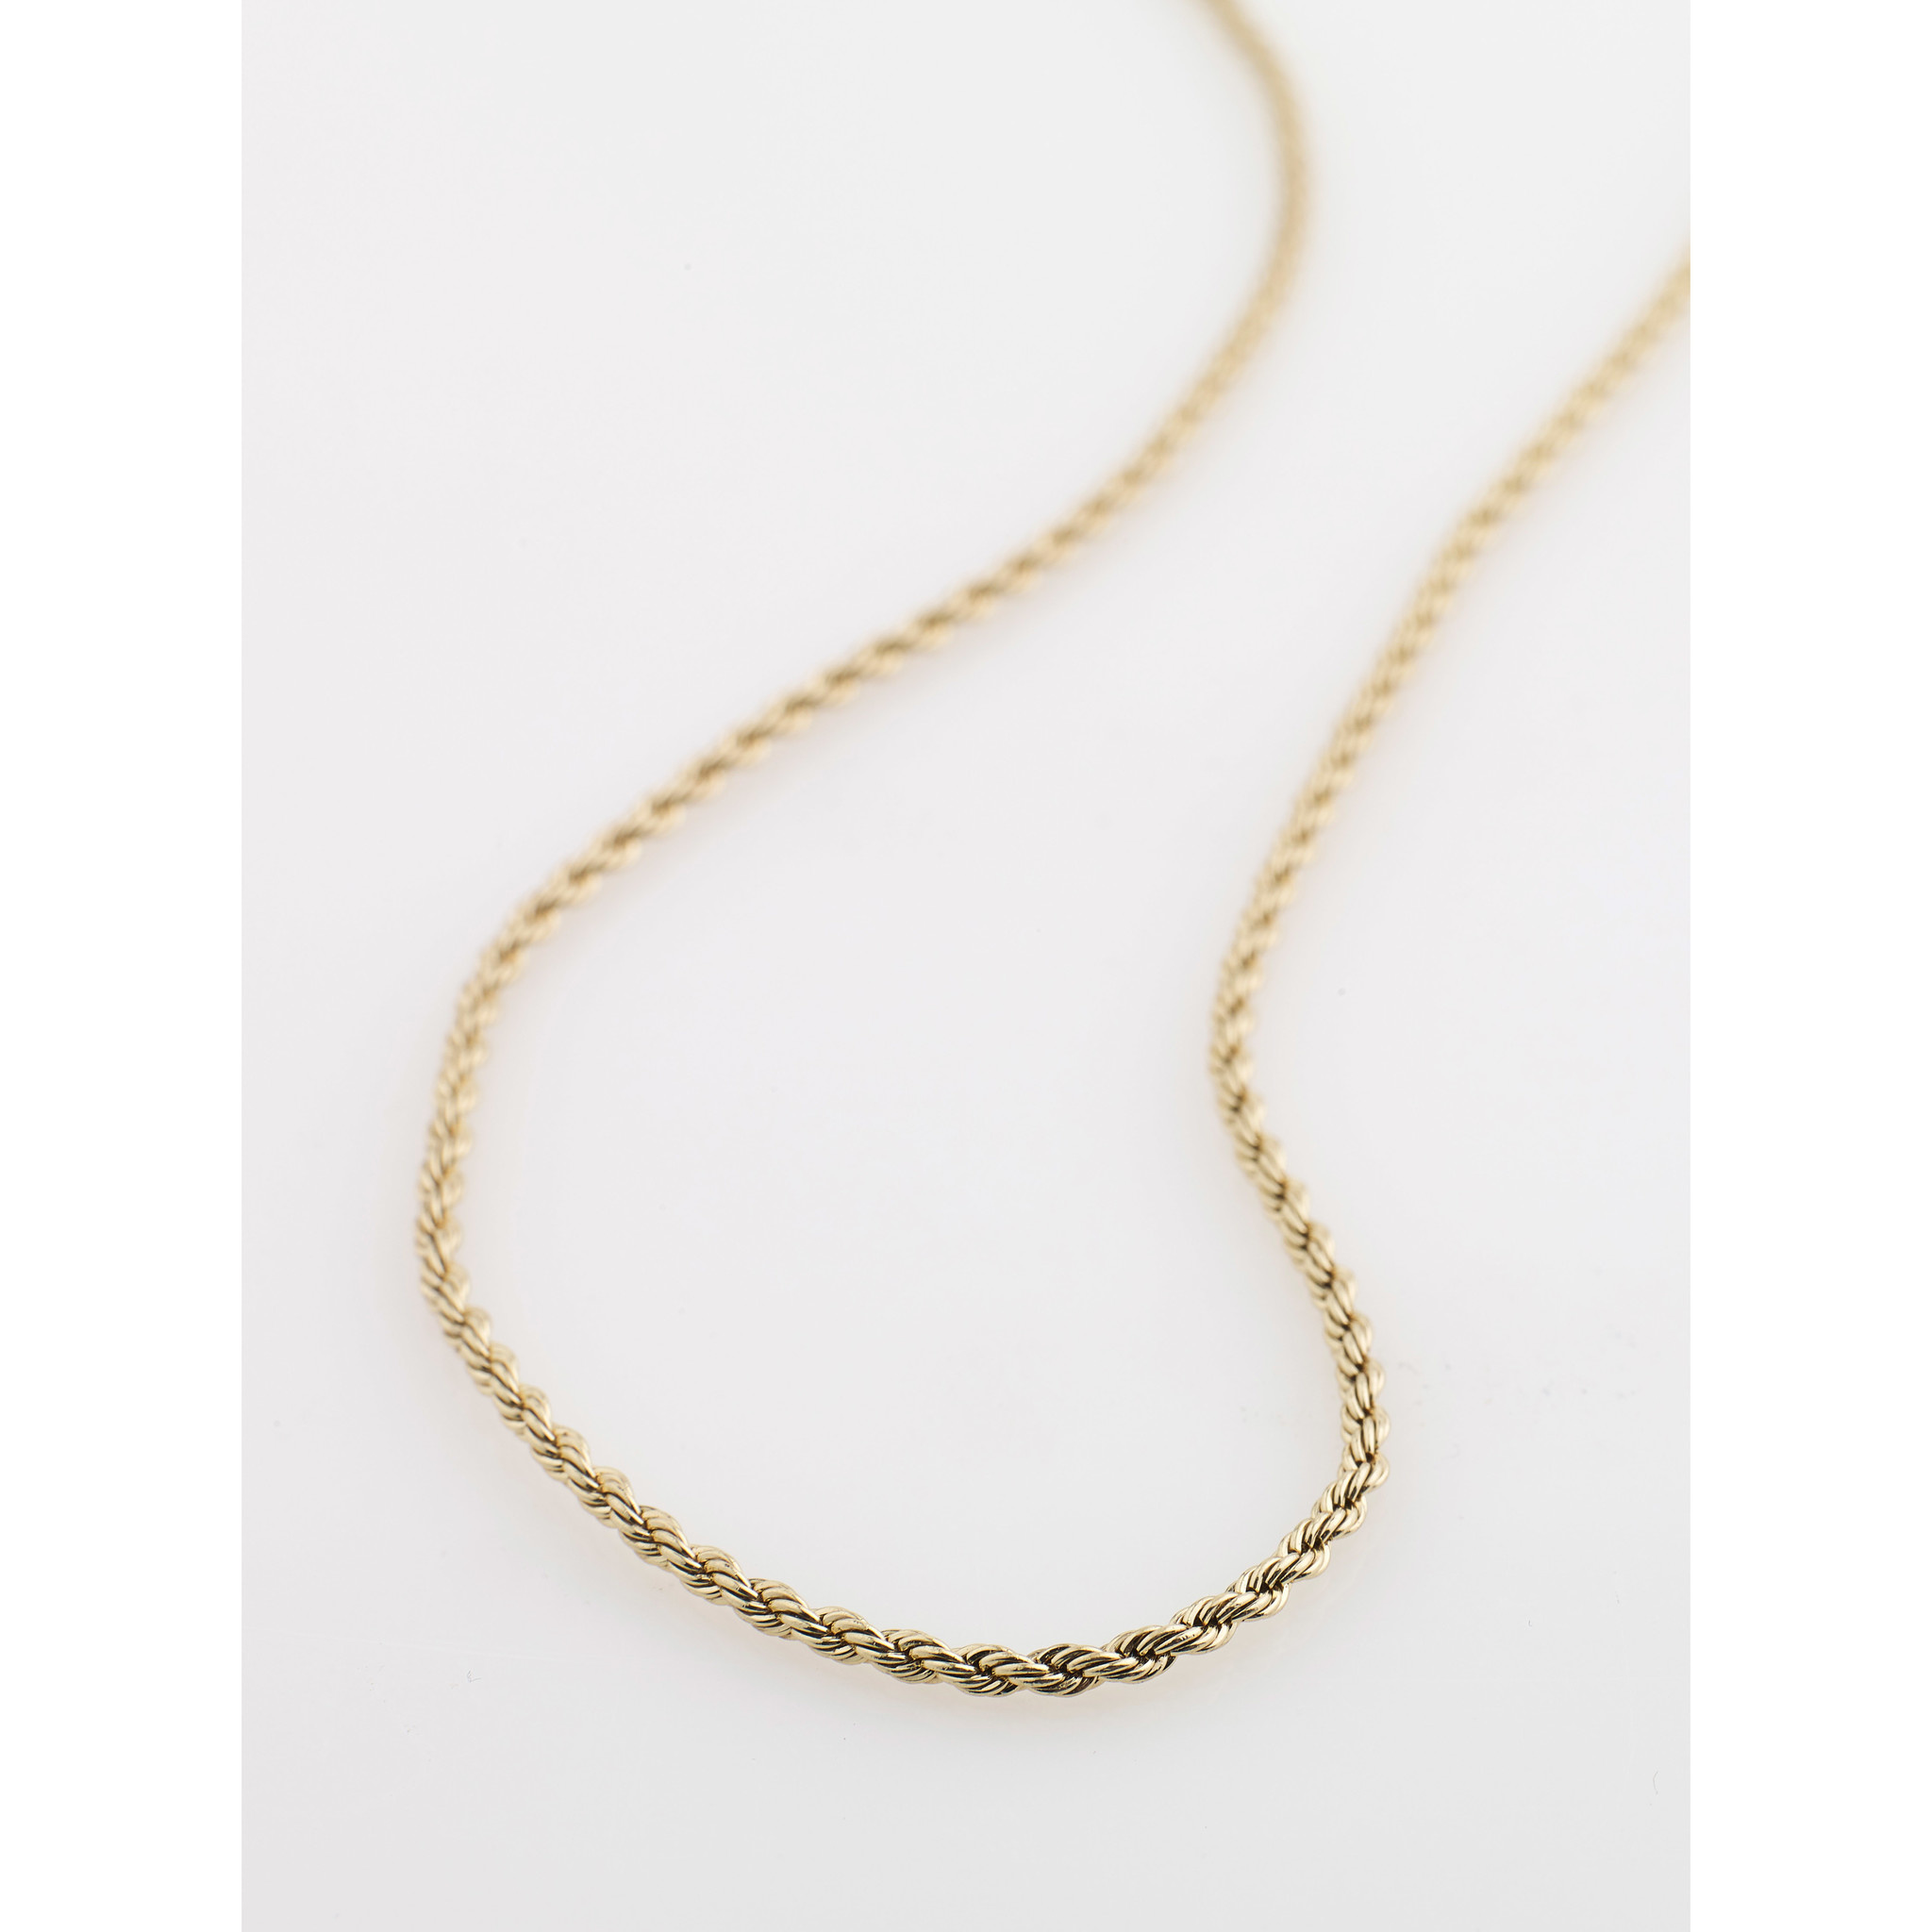 Pilgrim Pam Necklace, Gold Plated